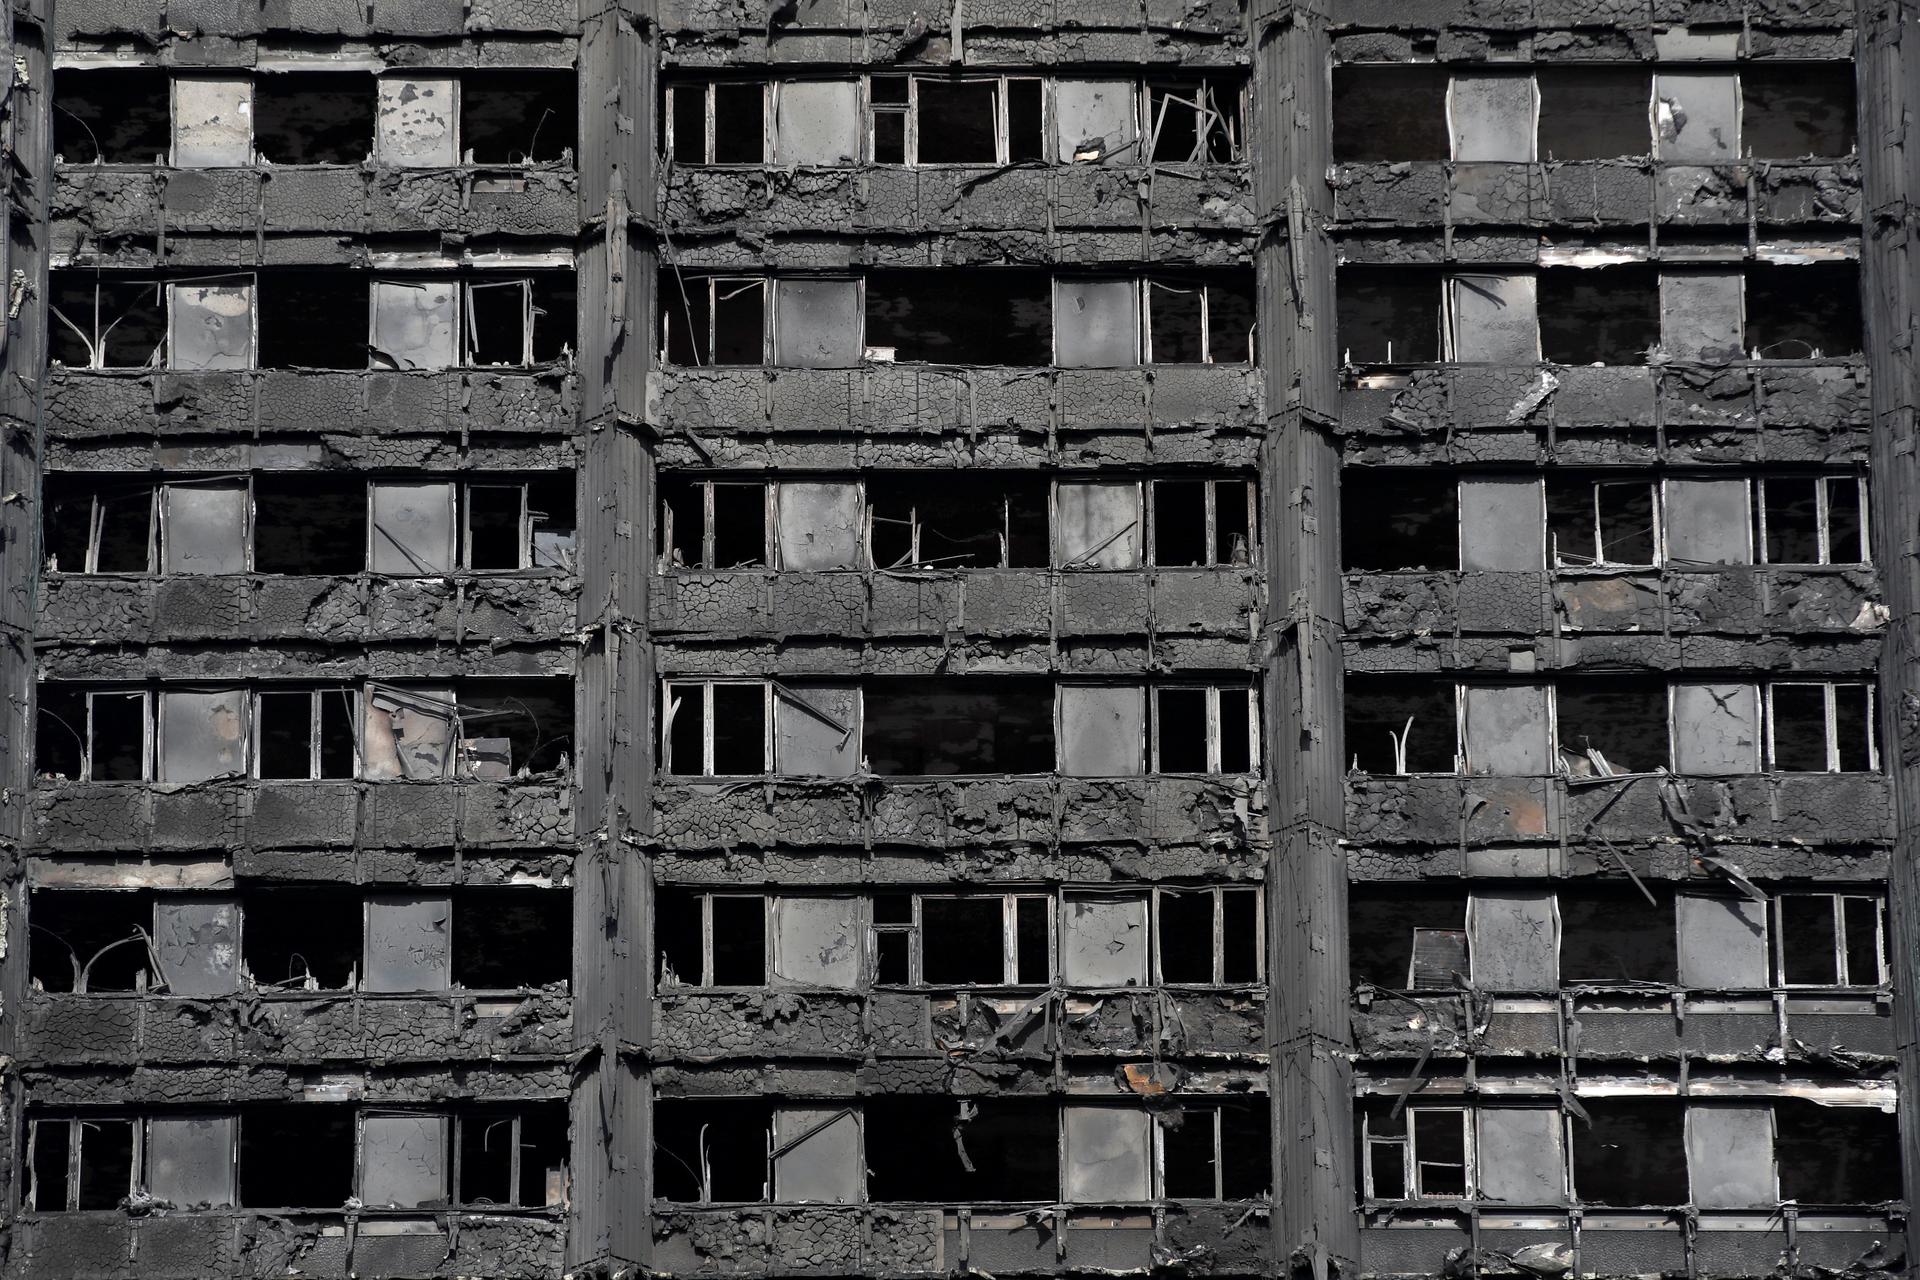 Extensive damage is seen to the Grenfell Tower block which was destroyed in a fire disaster, in north Kensington, West London.